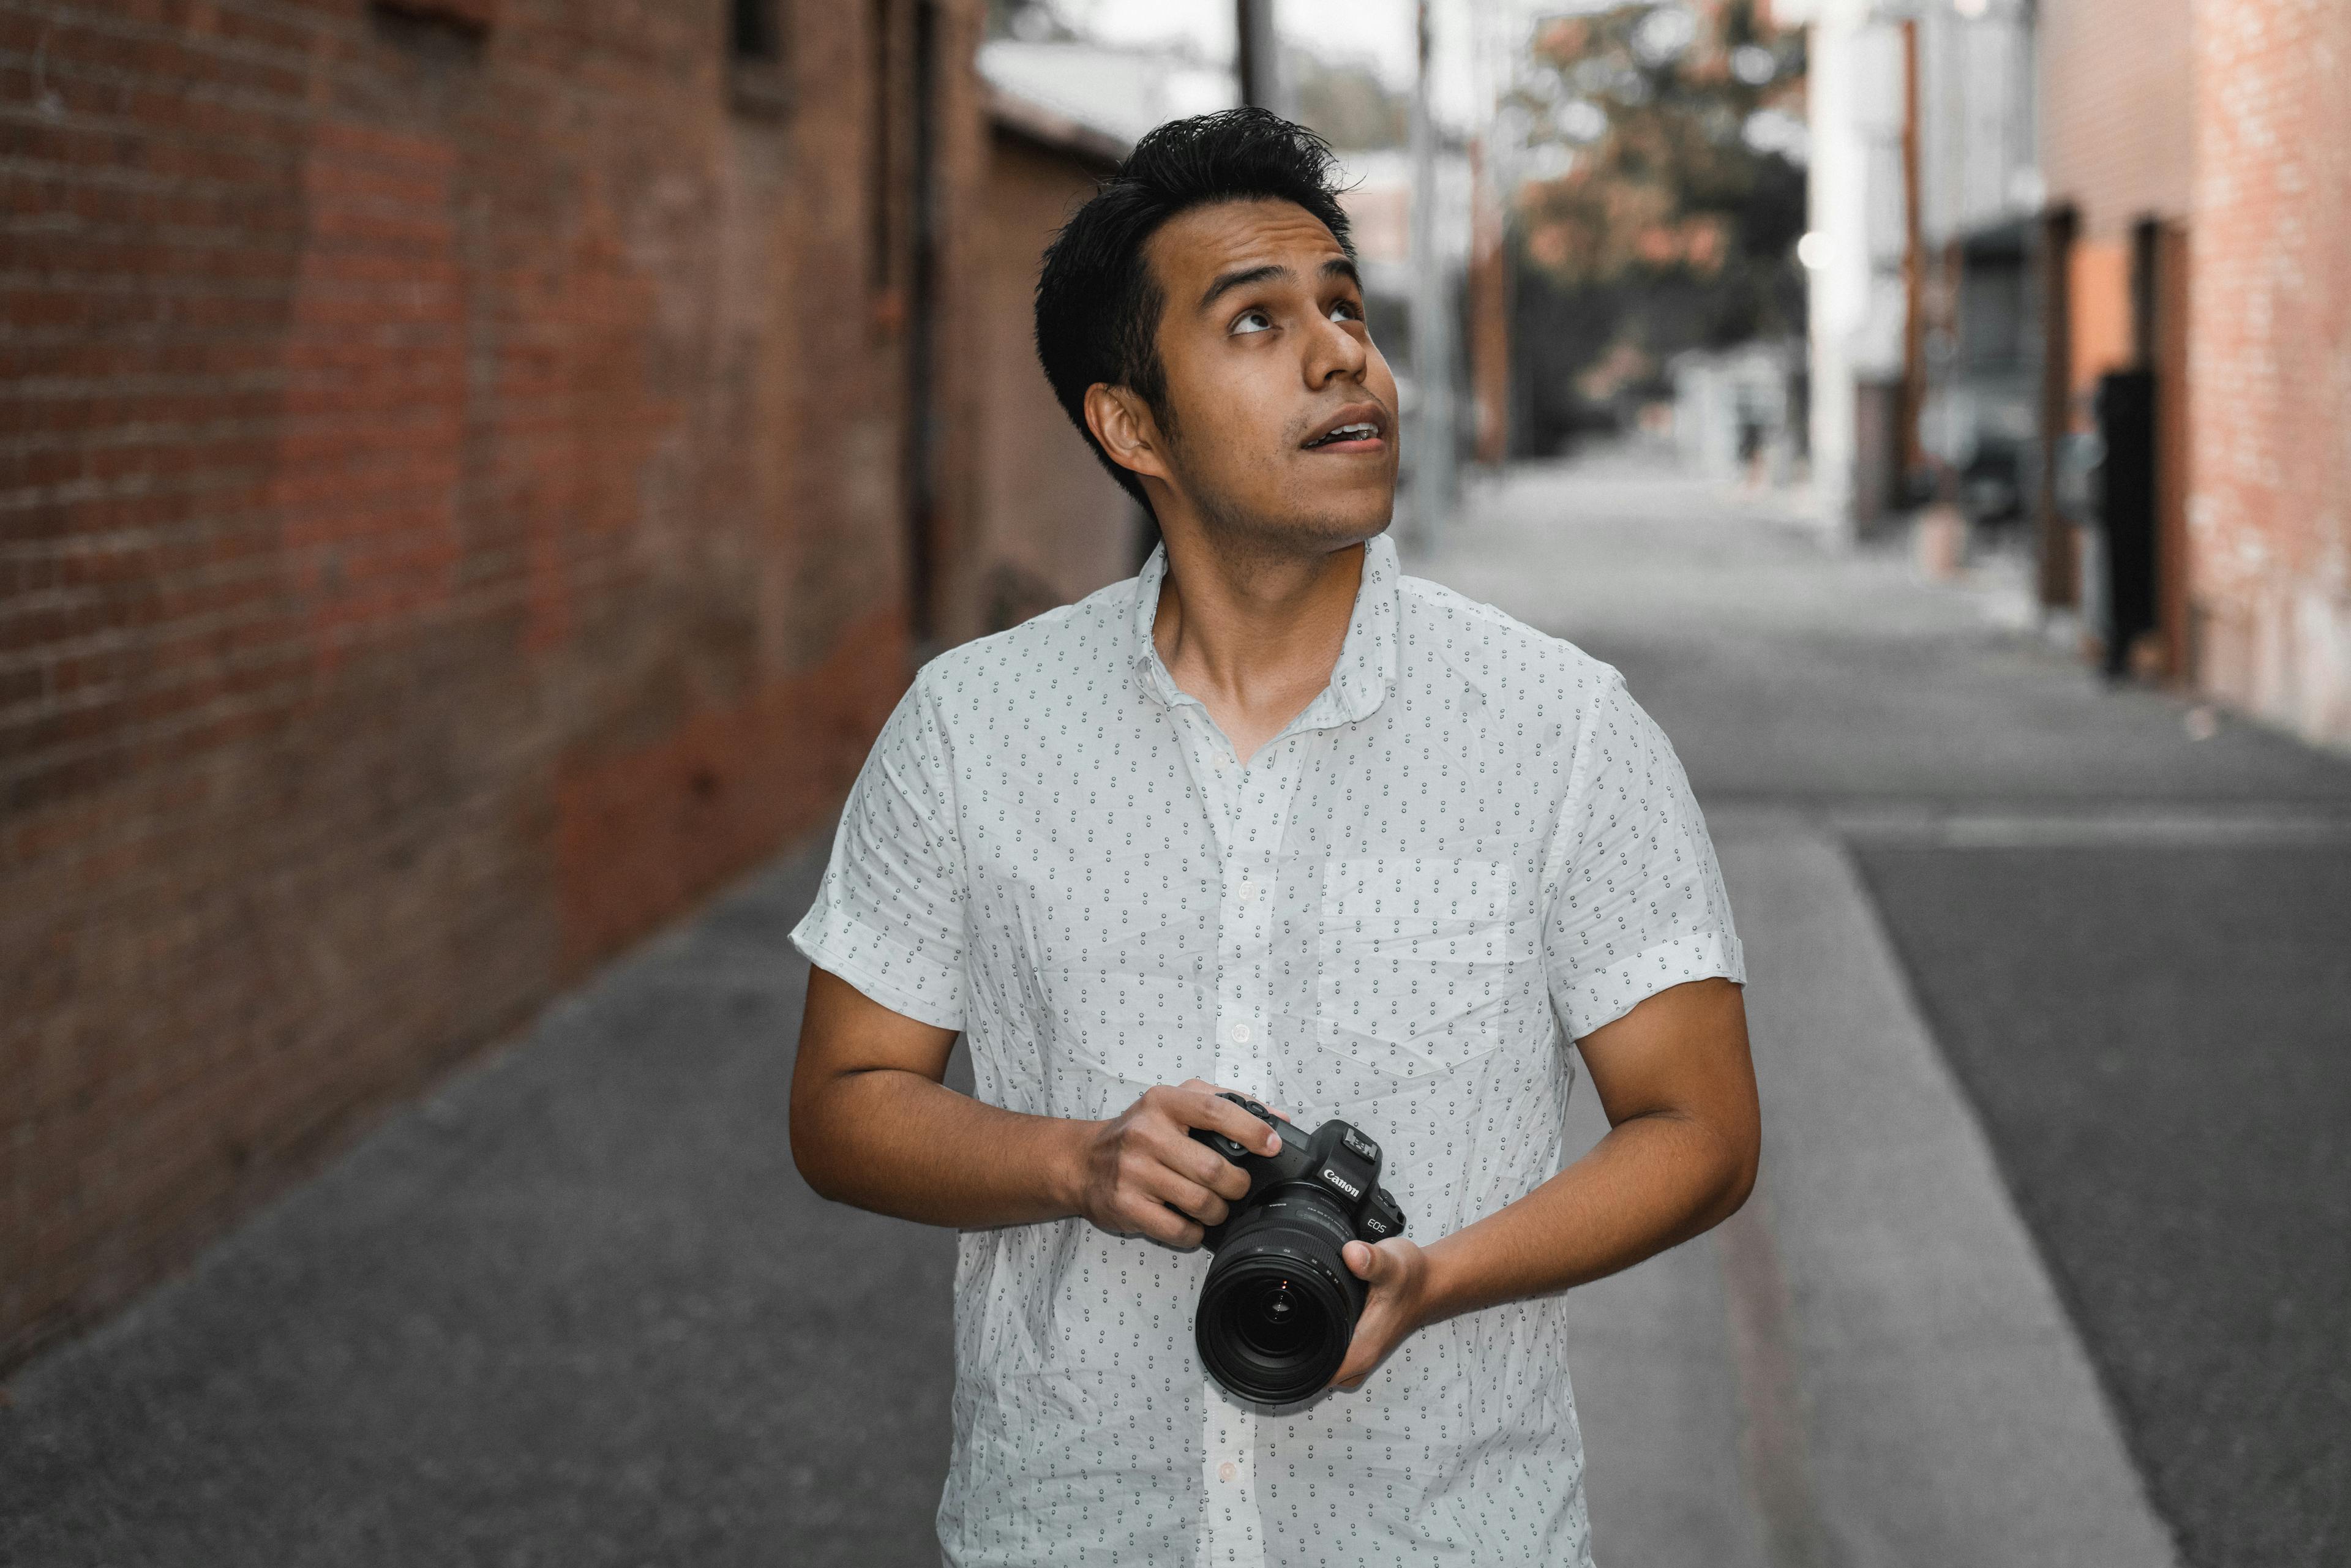 Pensive young man with a camera standing in an urban alley.